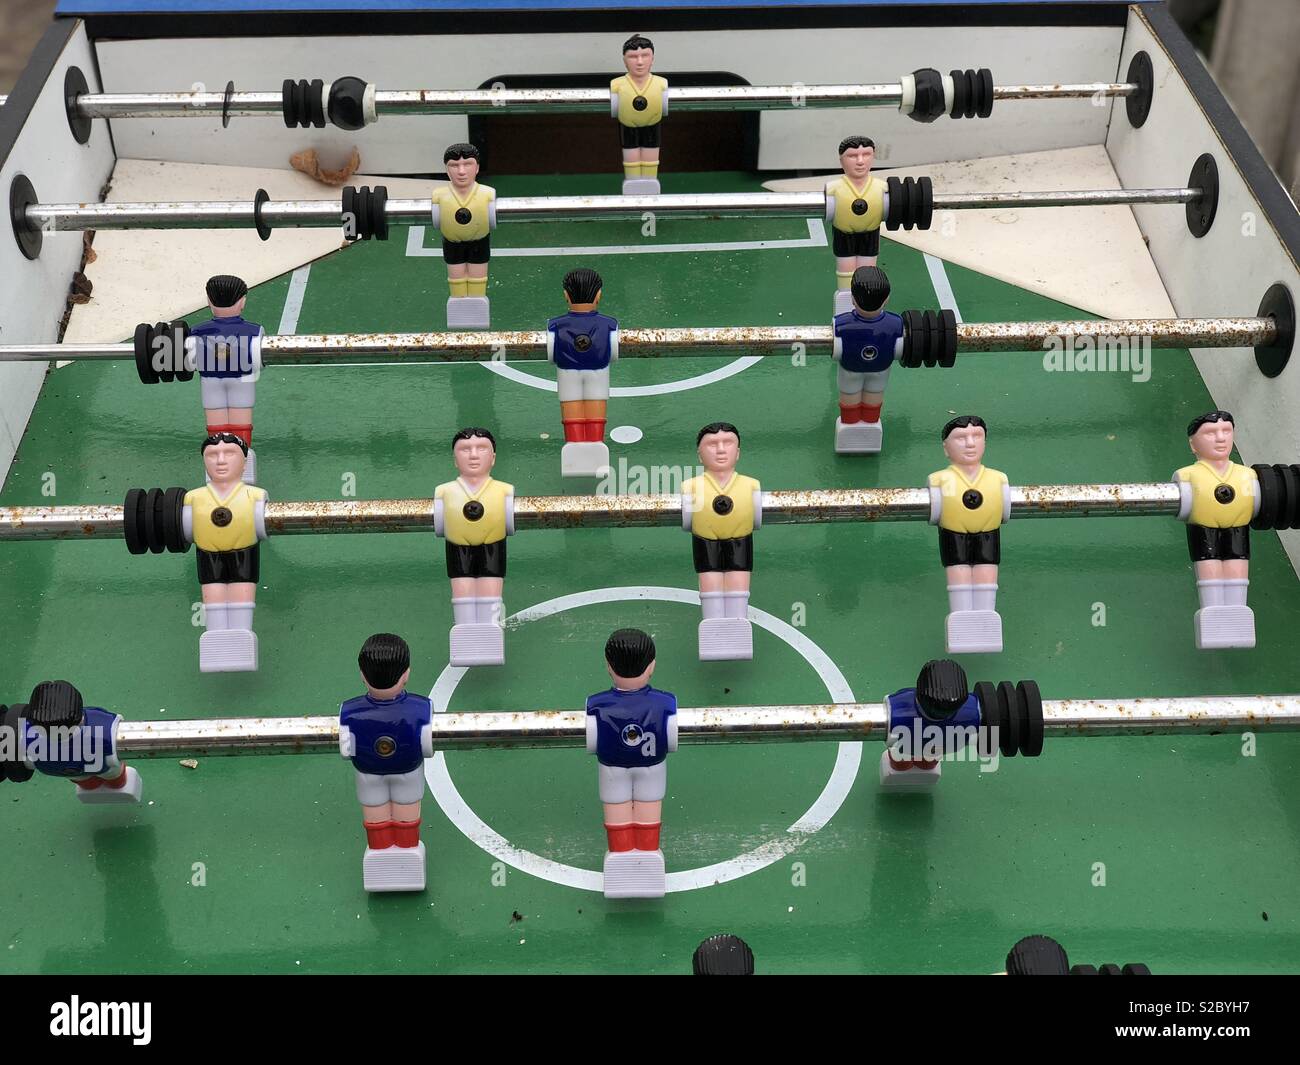 Table football view Stock Photo